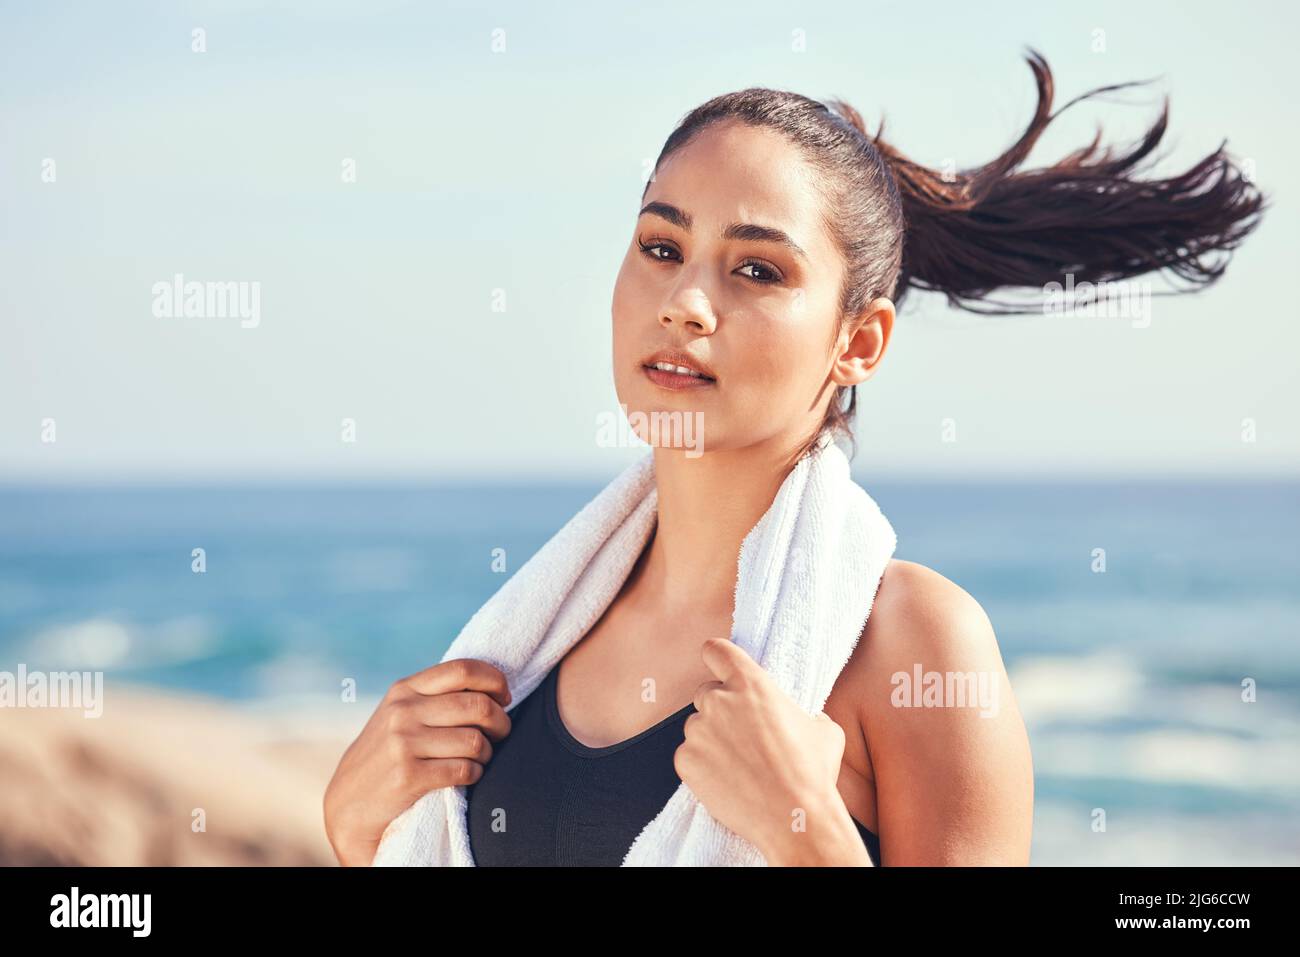 Ready to mop up some sweat. Shot of a young woman taking a break during a workout. Stock Photo